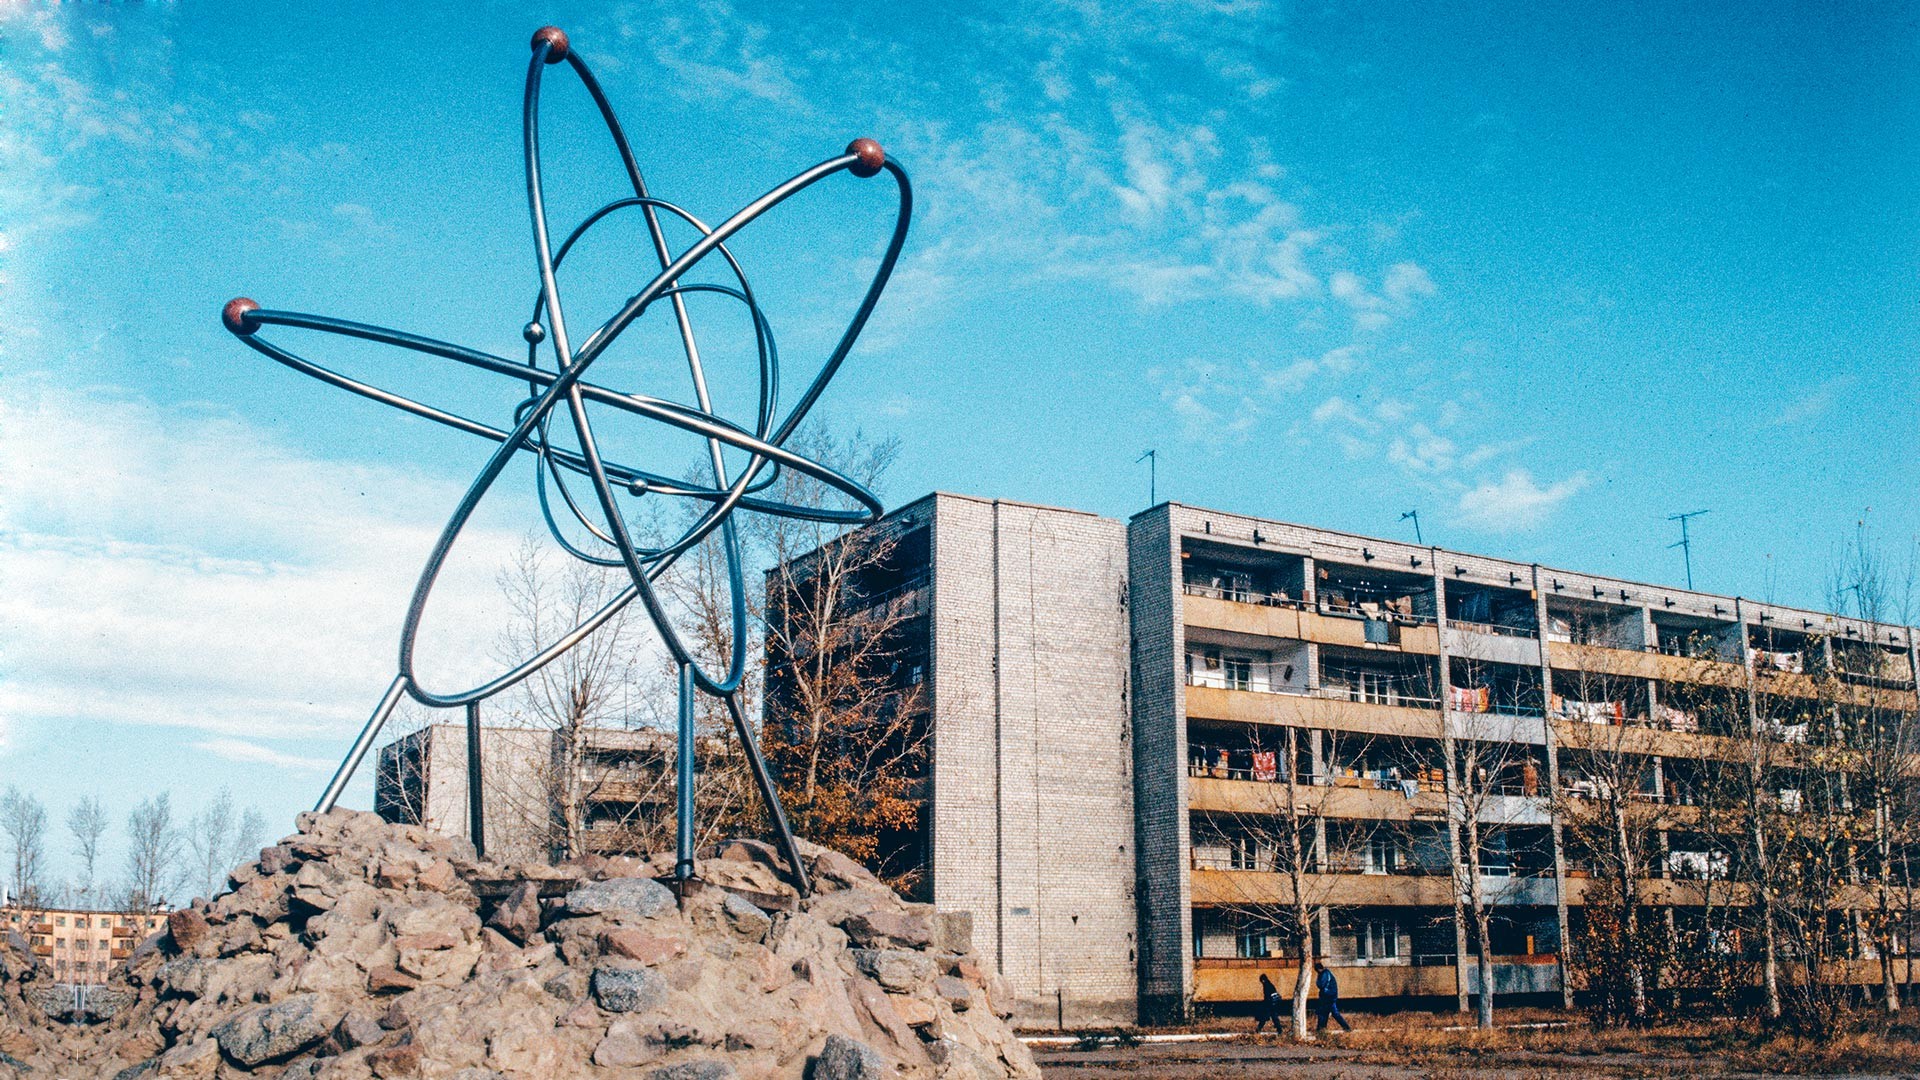 The National Nuclear Centre in Kurchatov.